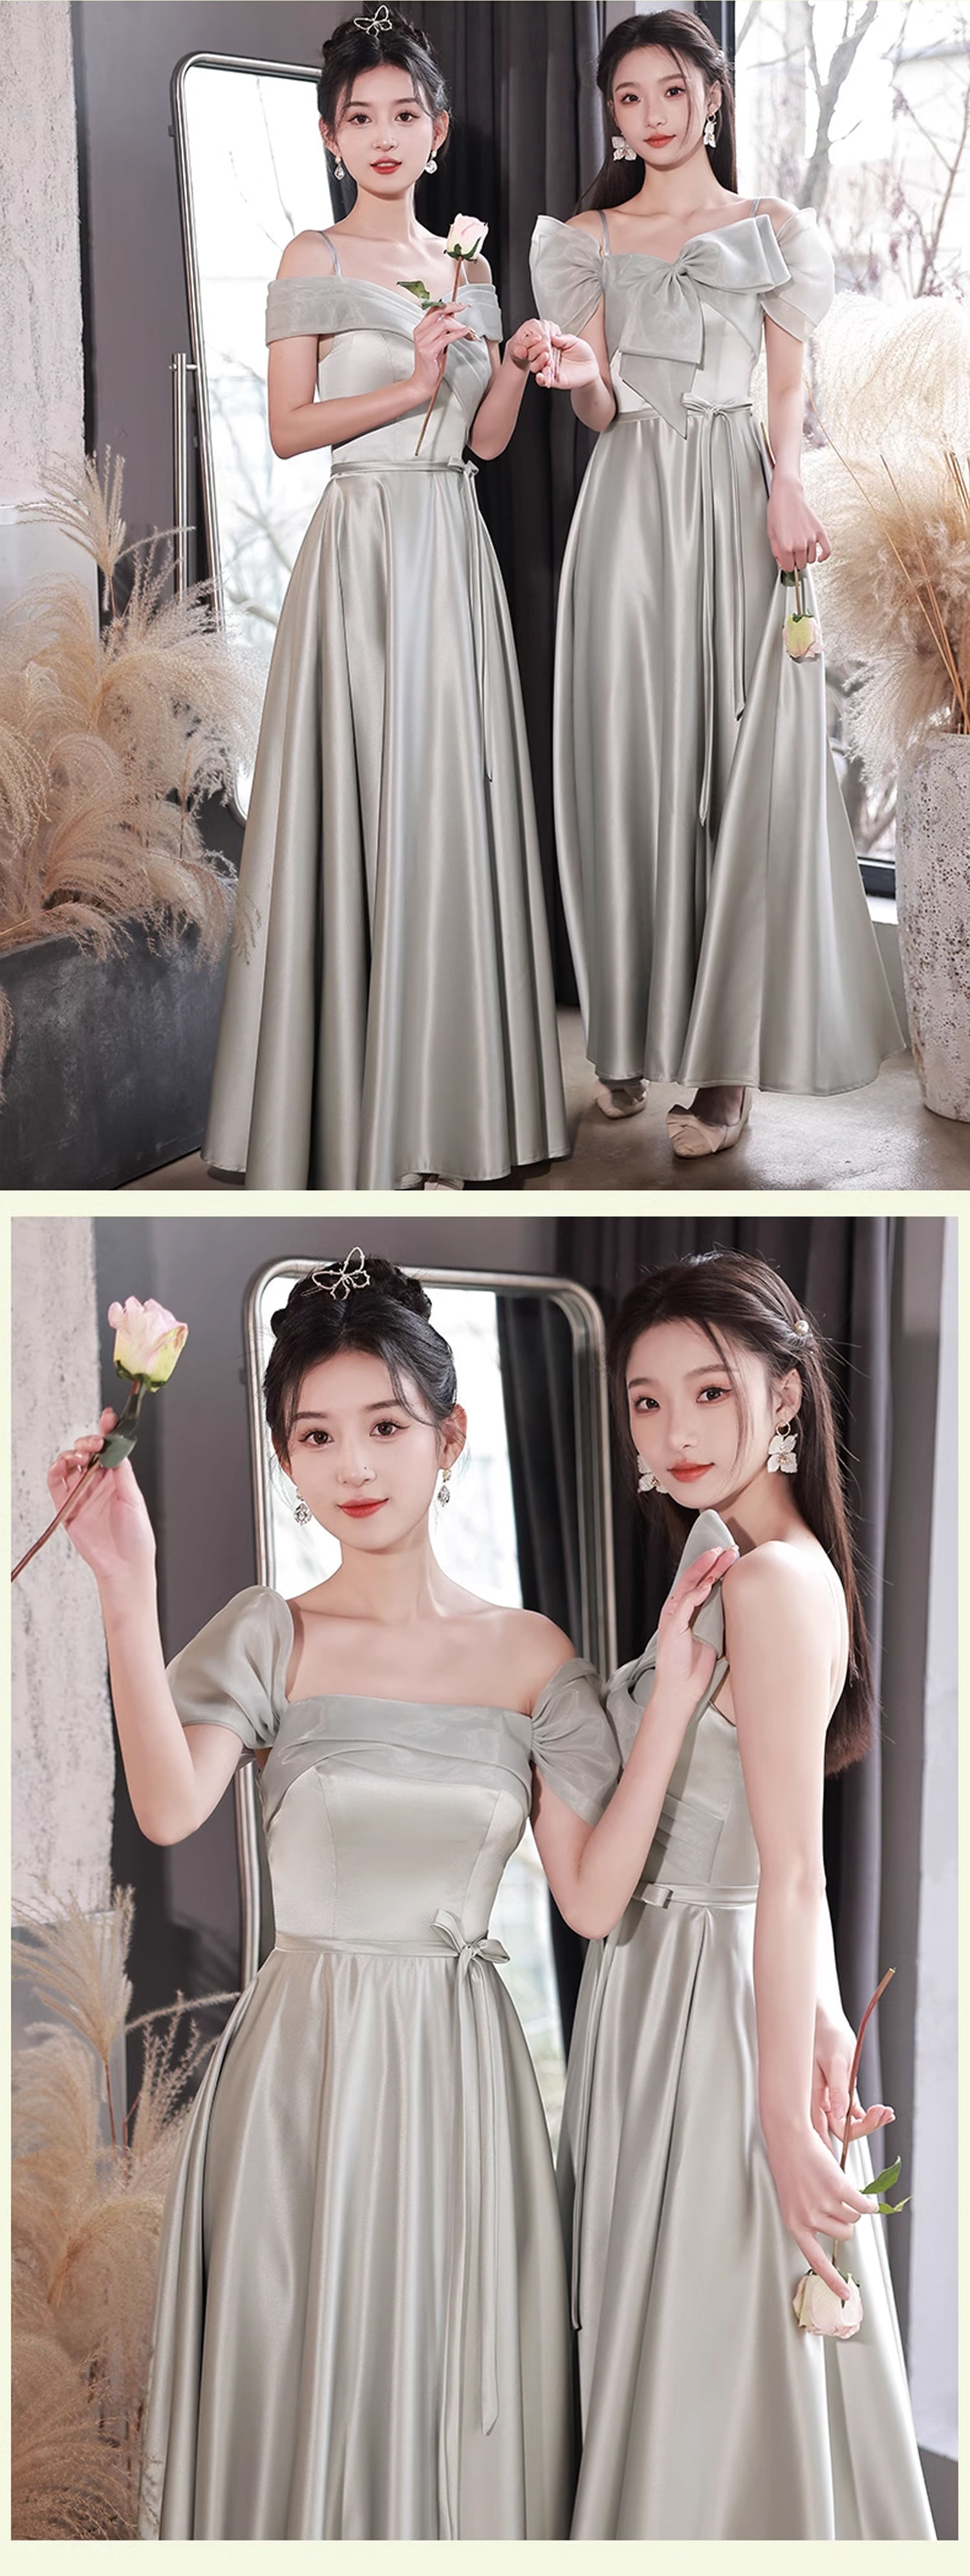 Simple-Gray-Satin-Bridesmaid-Dress-Sweet-Casual-Party-Ball-Gown17